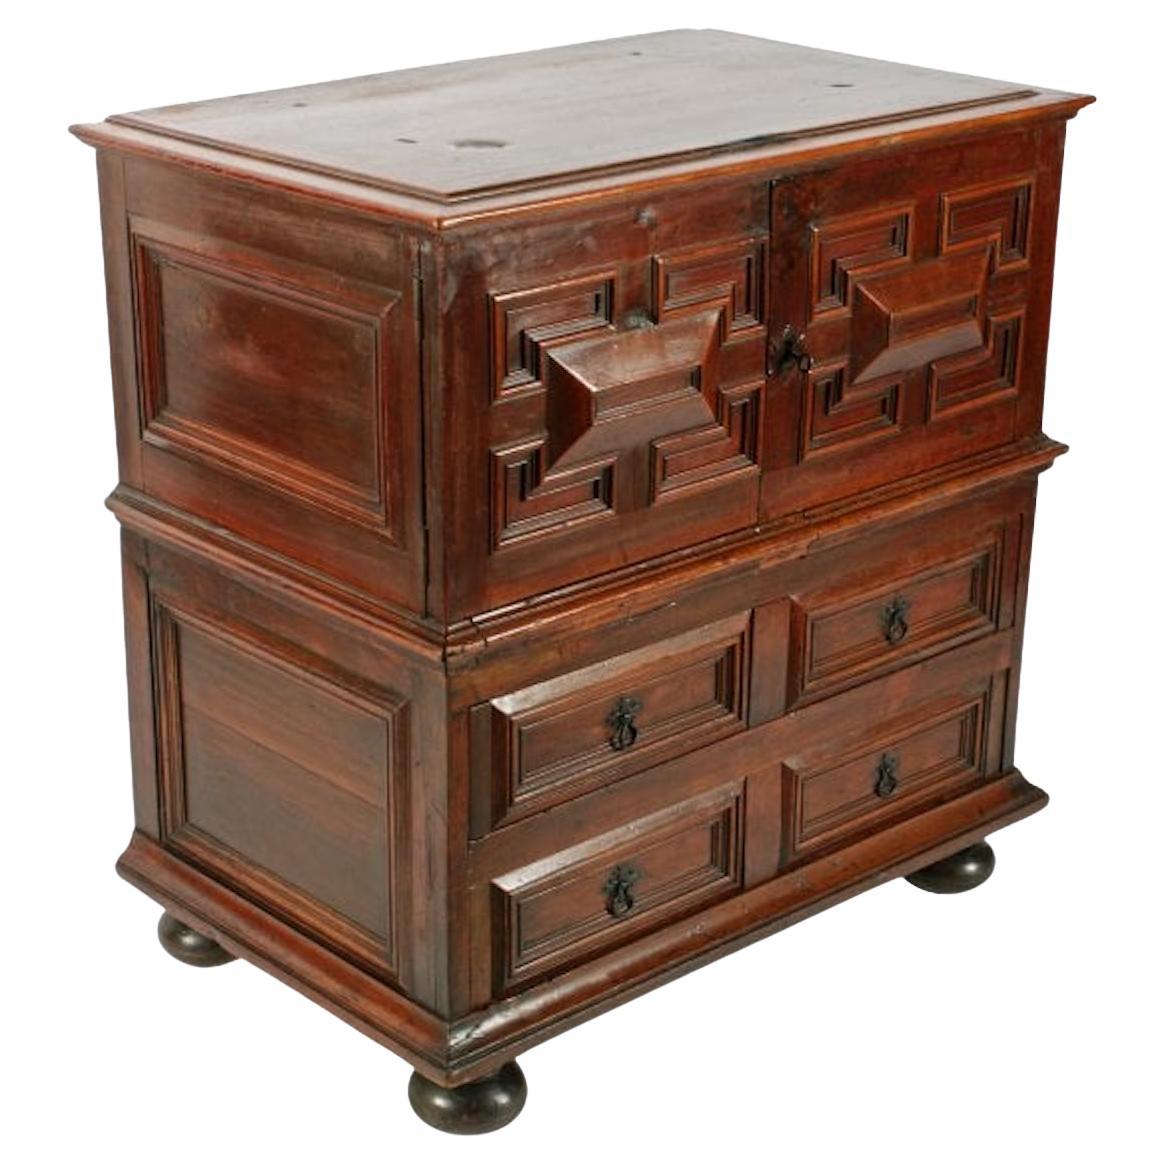 Charles II Cedar Wood chest

A 17th century Charles II cedar wood cushion fronted chest.

The chest is smaller than usual and comes in two parts, the two door cupboard top has been converted from a hinged lid top.

The chest has a cushion